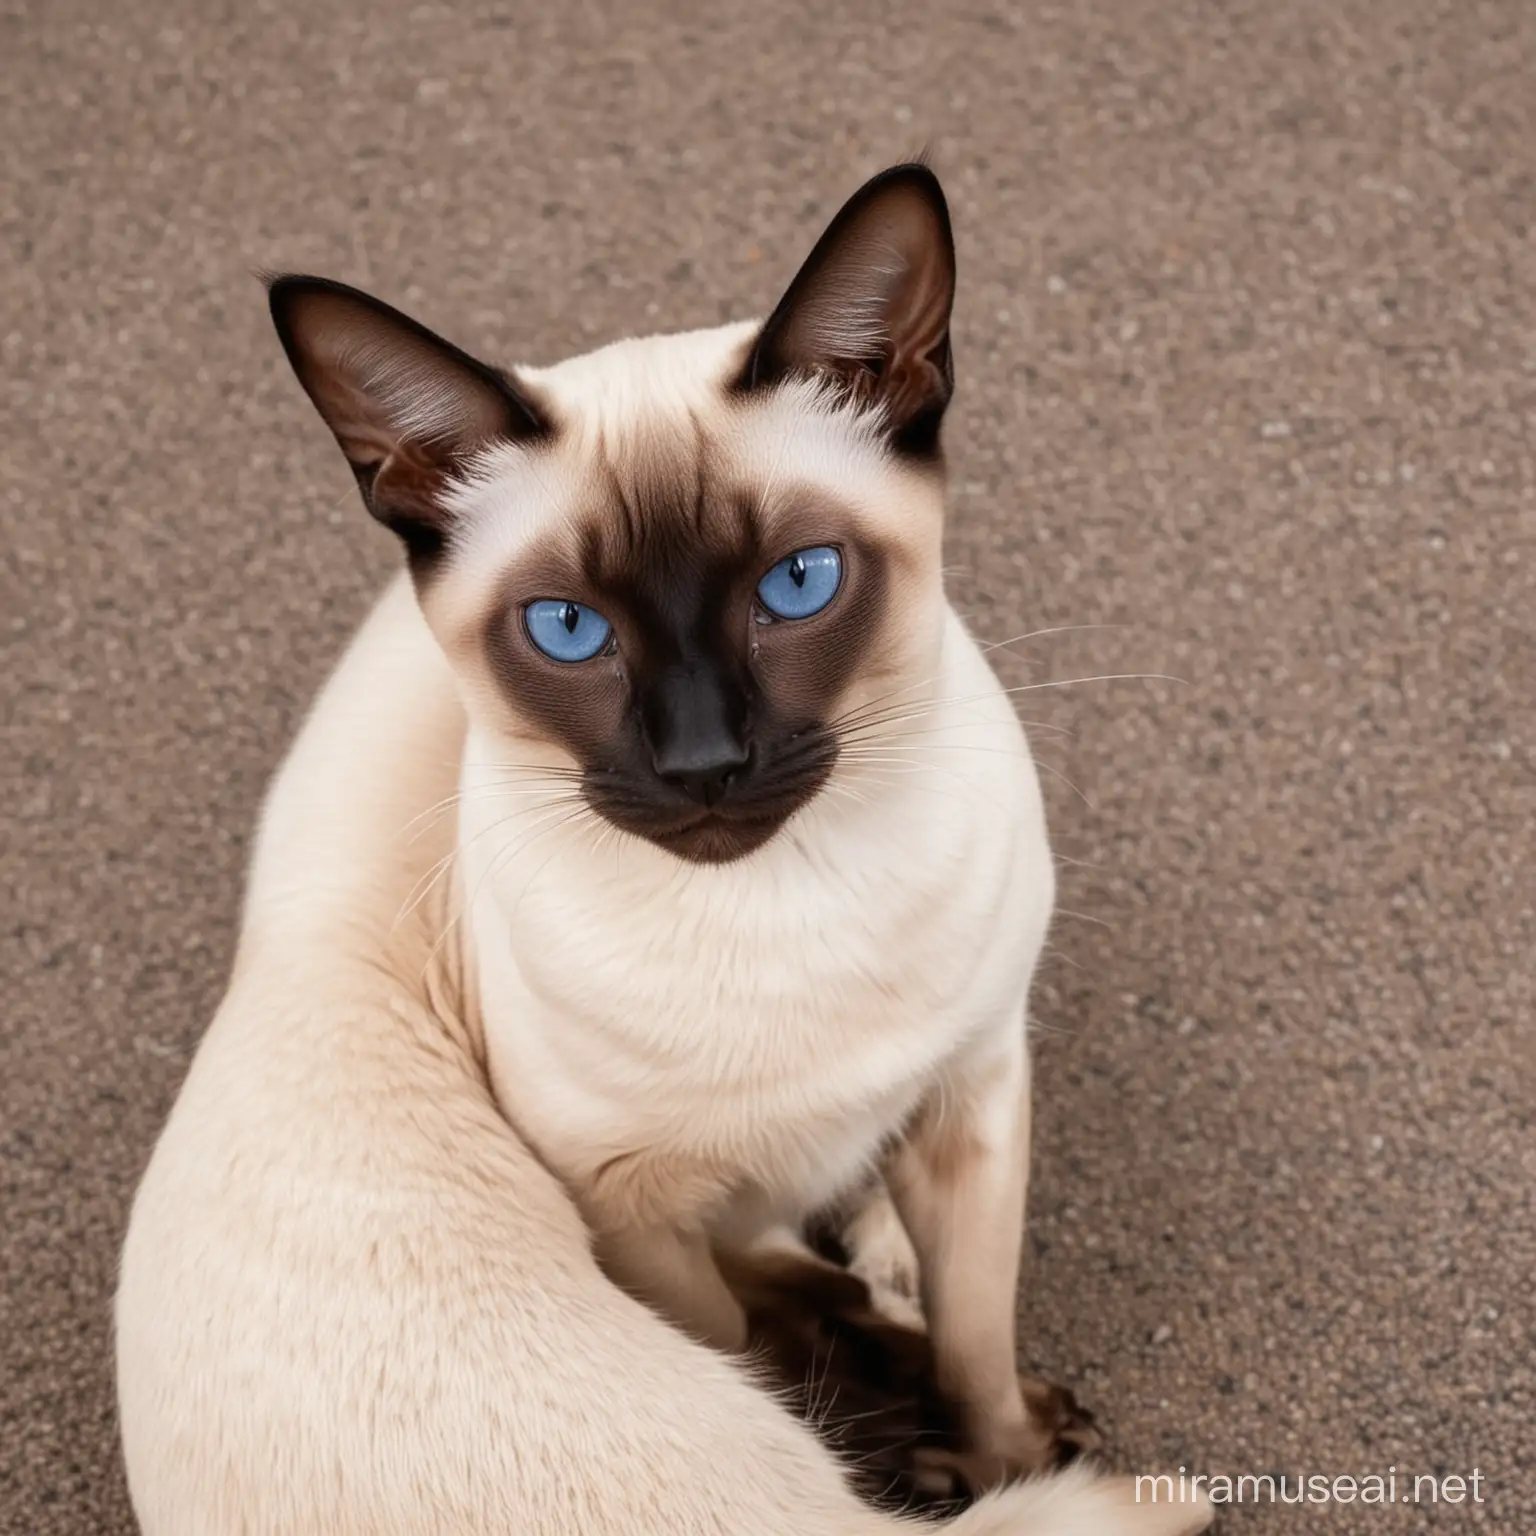 A playful and curious Siamese.